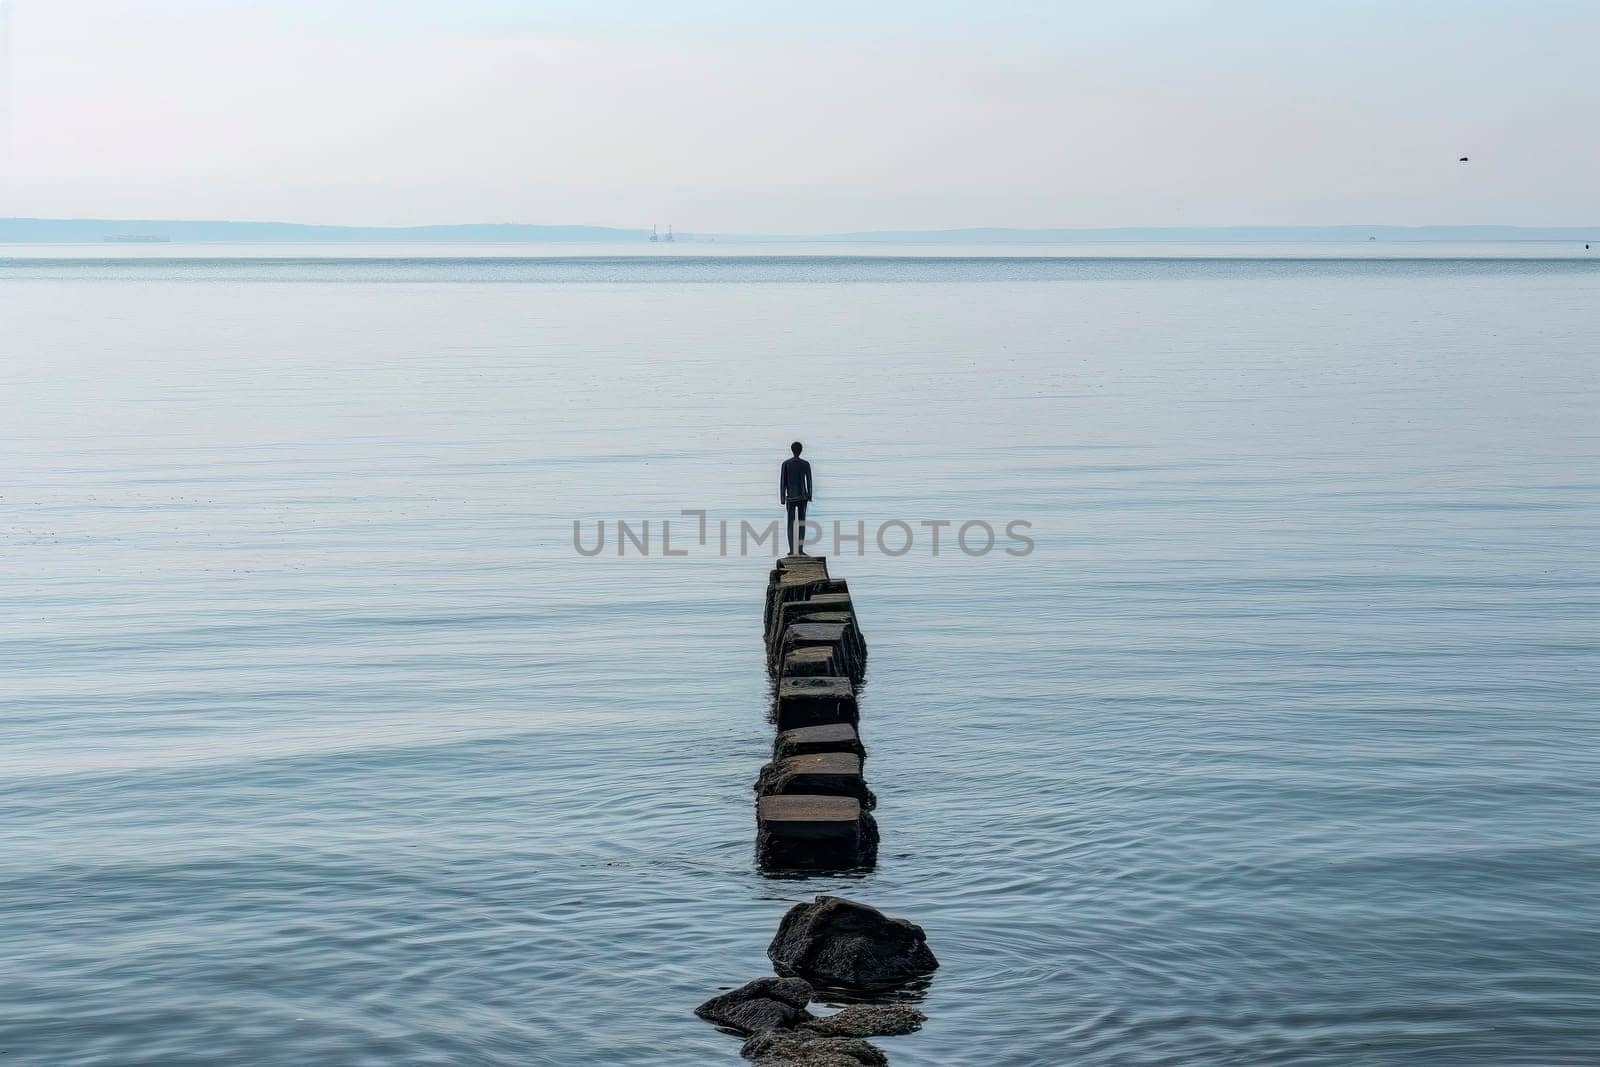 Wide shot capturing the serene silhouette of a lonely person on a sea pier.